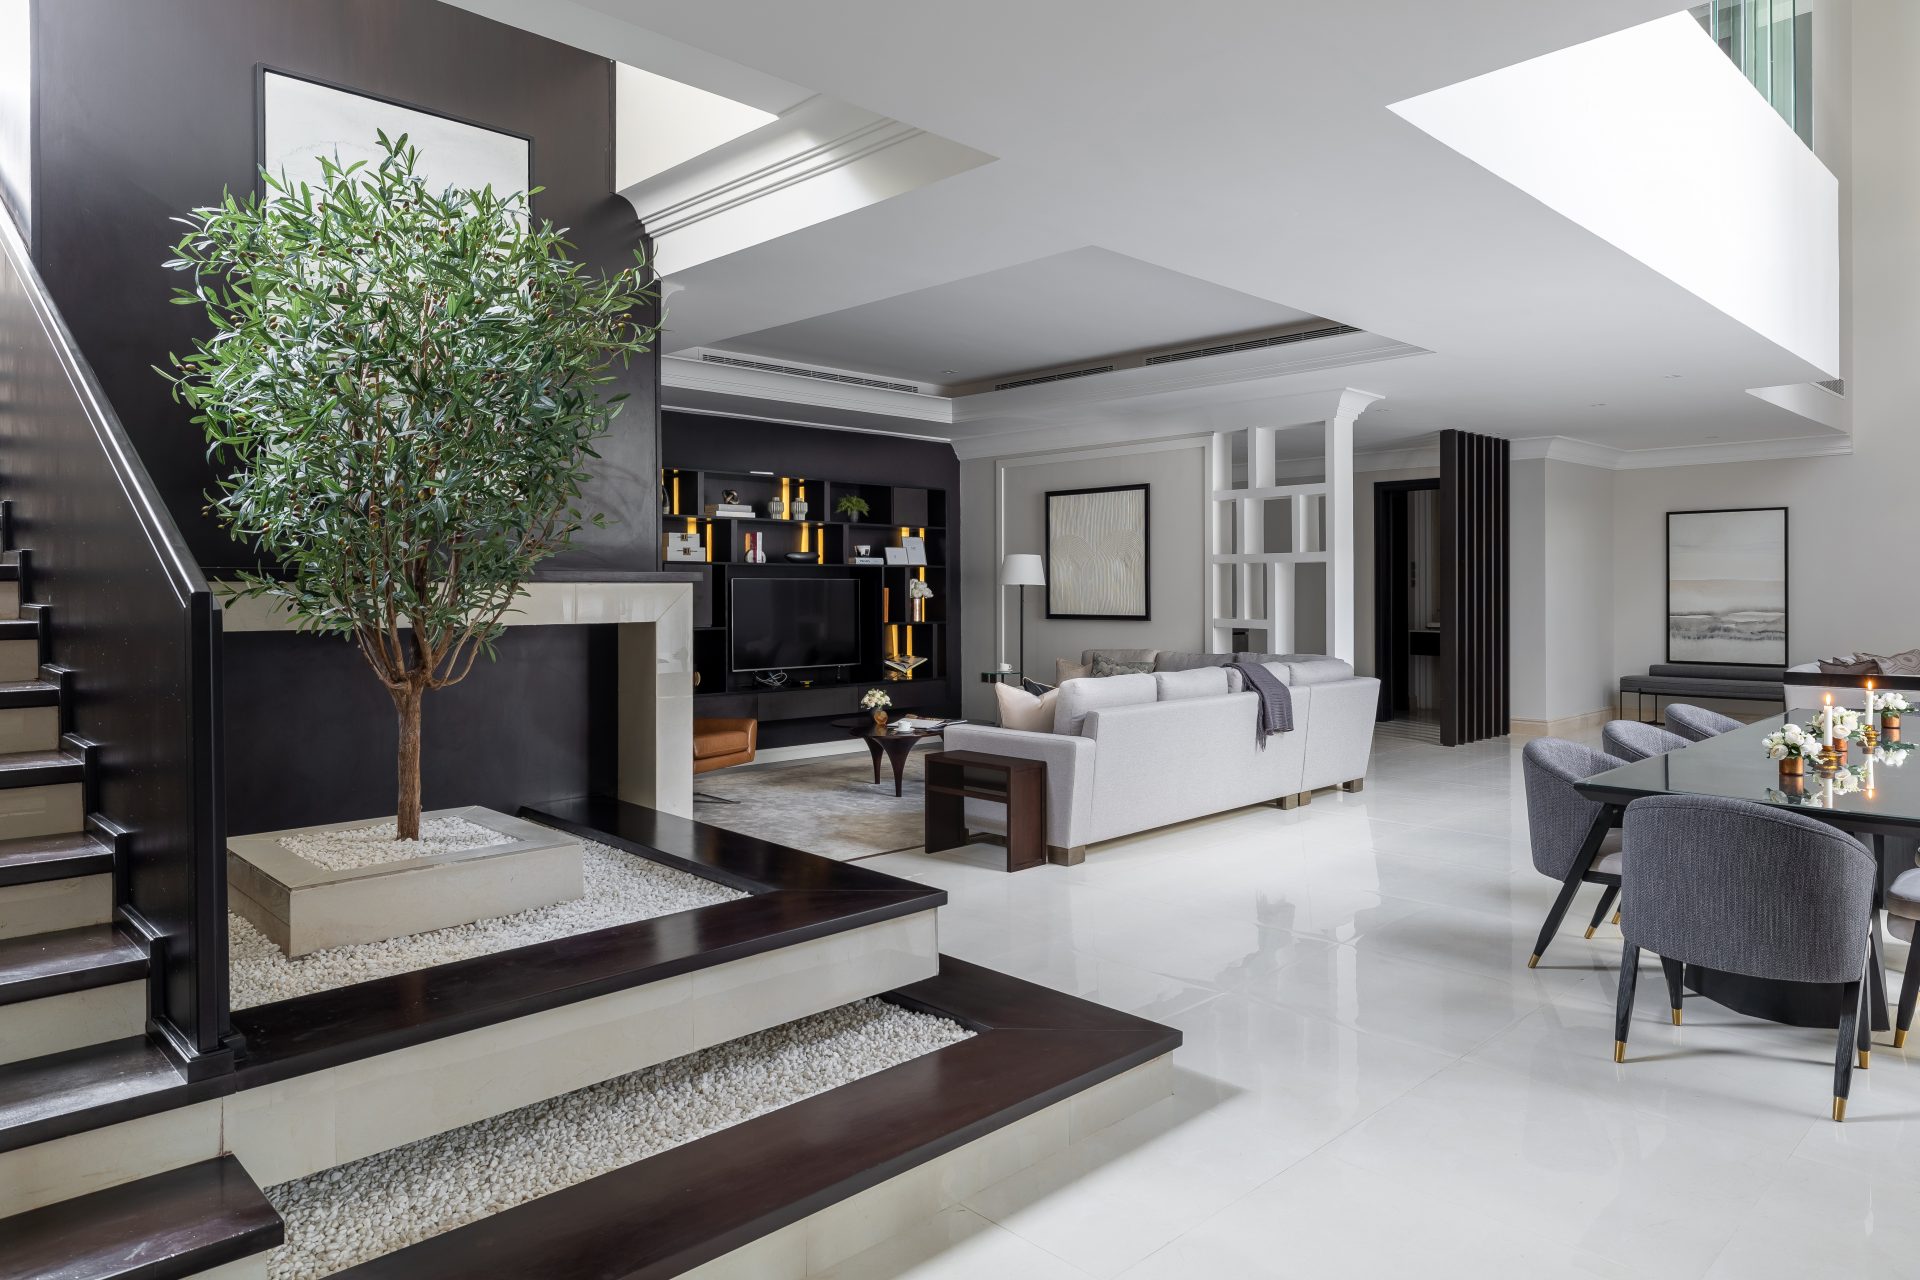 Quiet Luxury Interiors Expert Shares How to Create an Understated Luxe  Look  Build Magazine